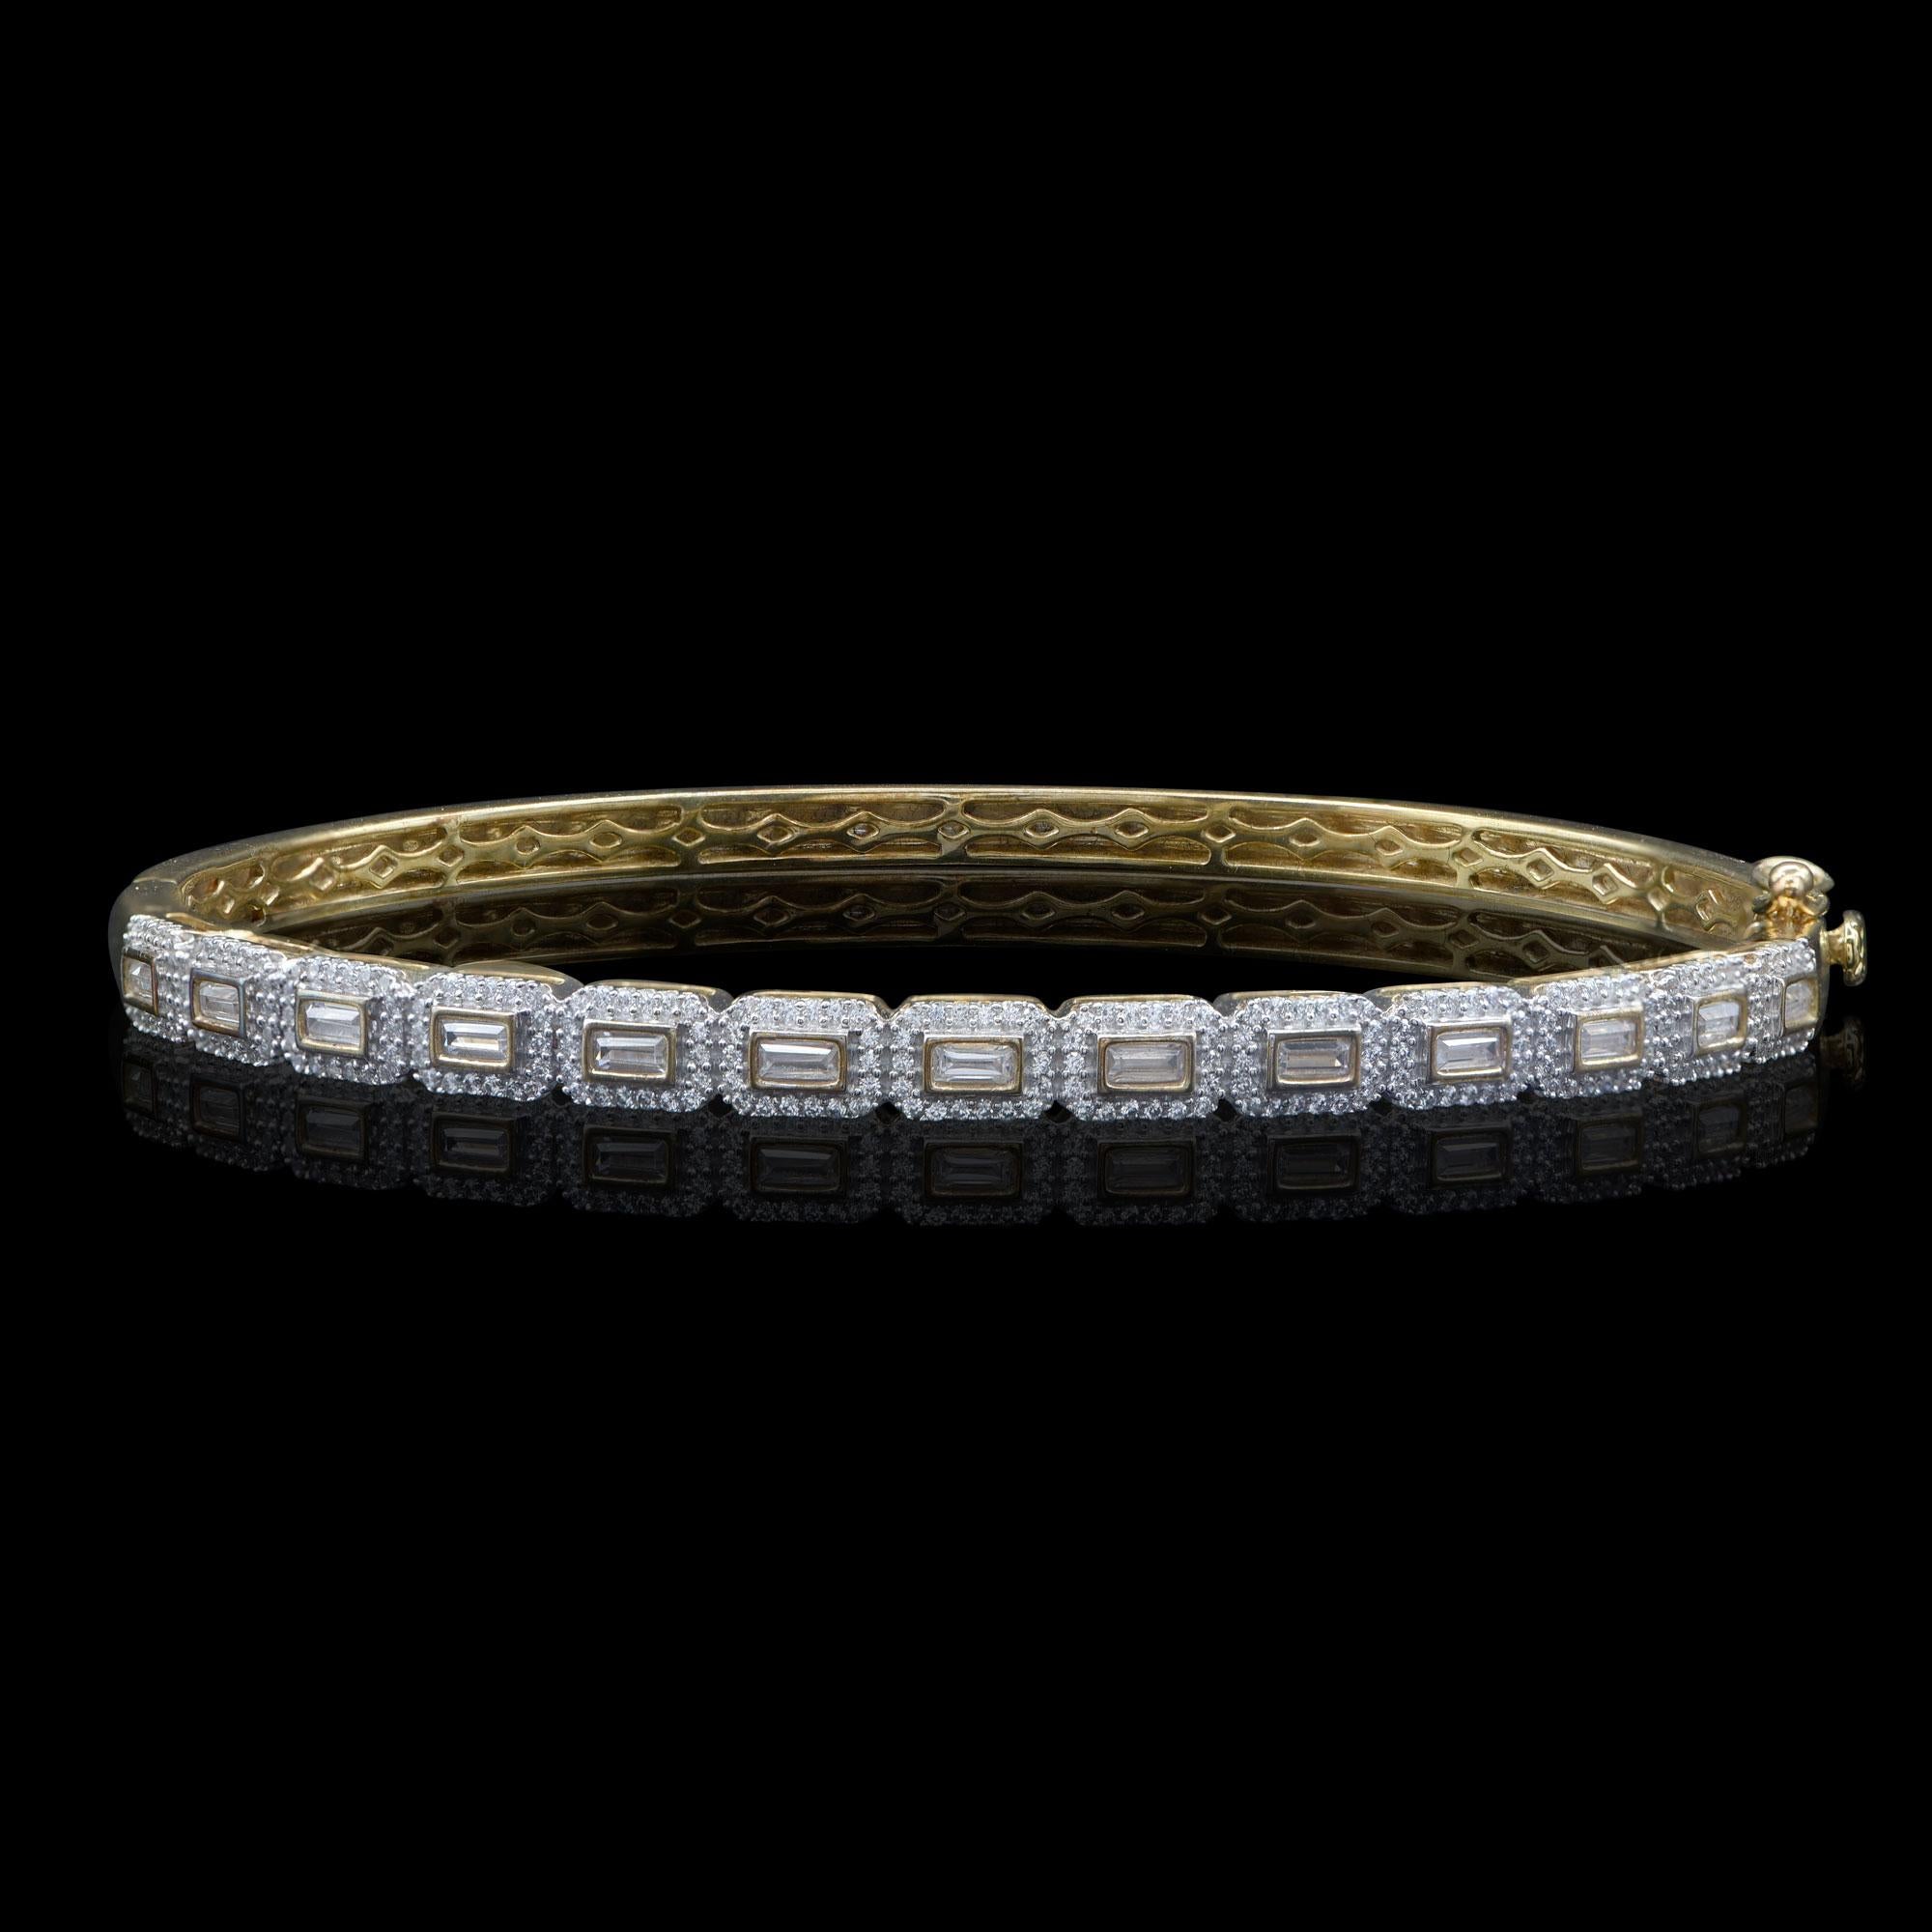 Exquisitely designed, this diamond bangle is studded with 234 brilliant and 13 baguette cut diamonds in stackable prong and prong setting. The bangle is hand-crafted by our skillful craftsmen in 18-karat yellow gold. The diamonds are graded H-I